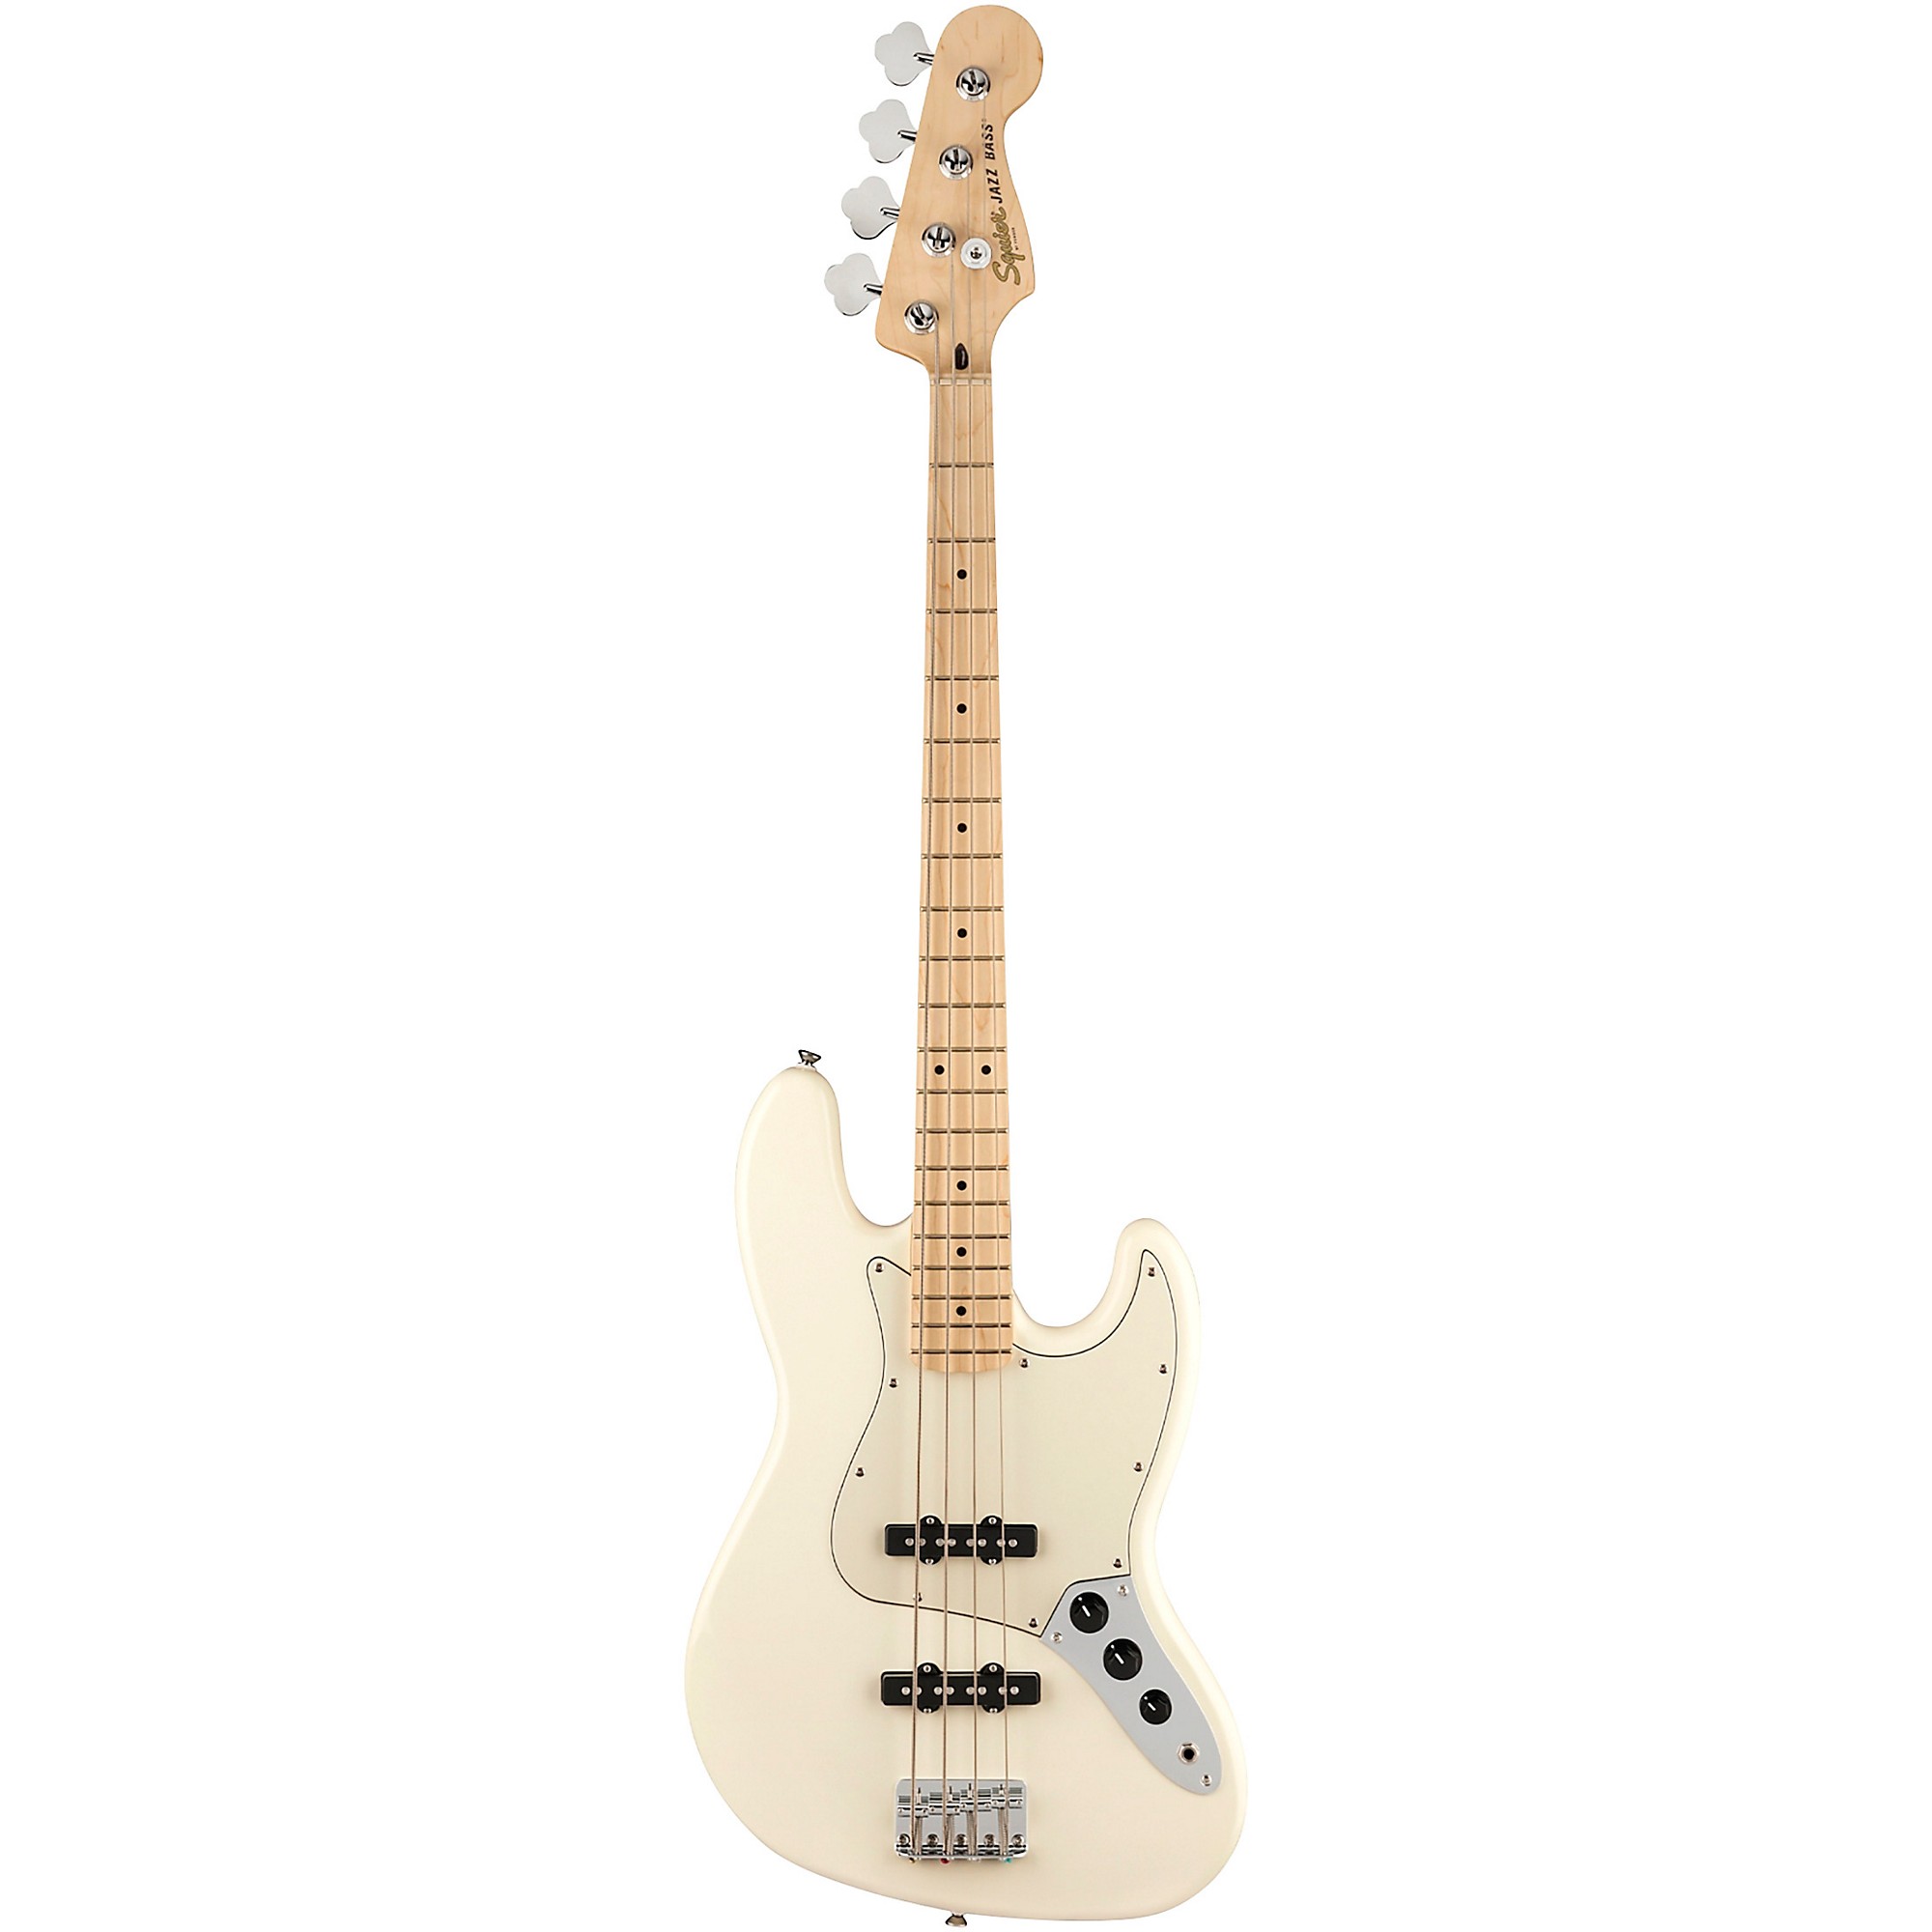 Squier Affinity Jazz Bass Limited-Edition Pack With Fender Rumble 